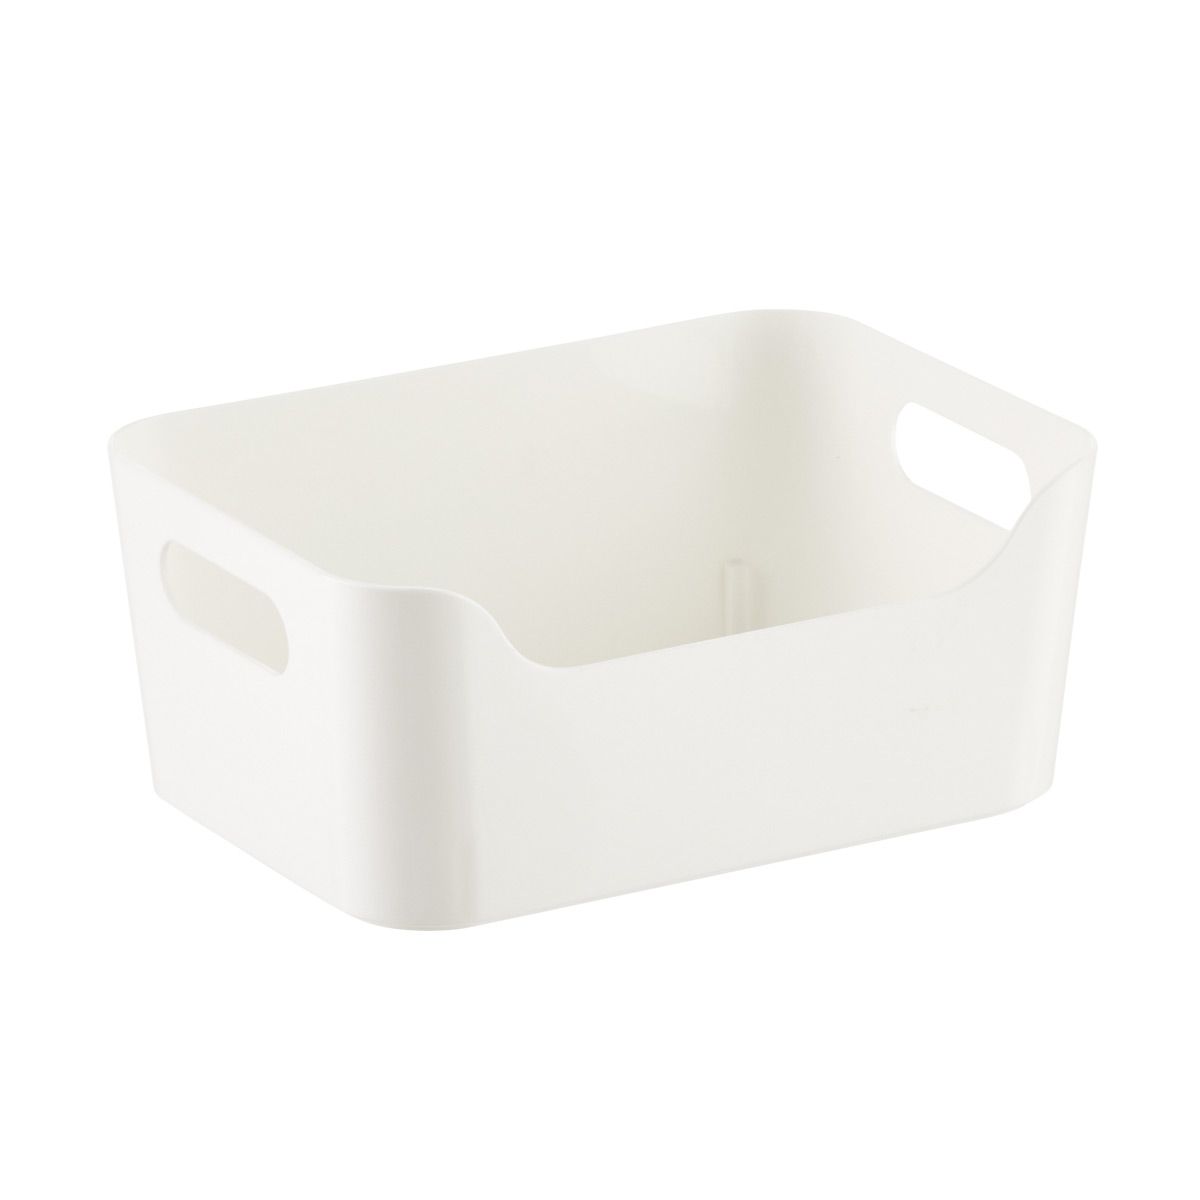 Plastic Storage Bin w/Handles | The Container Store